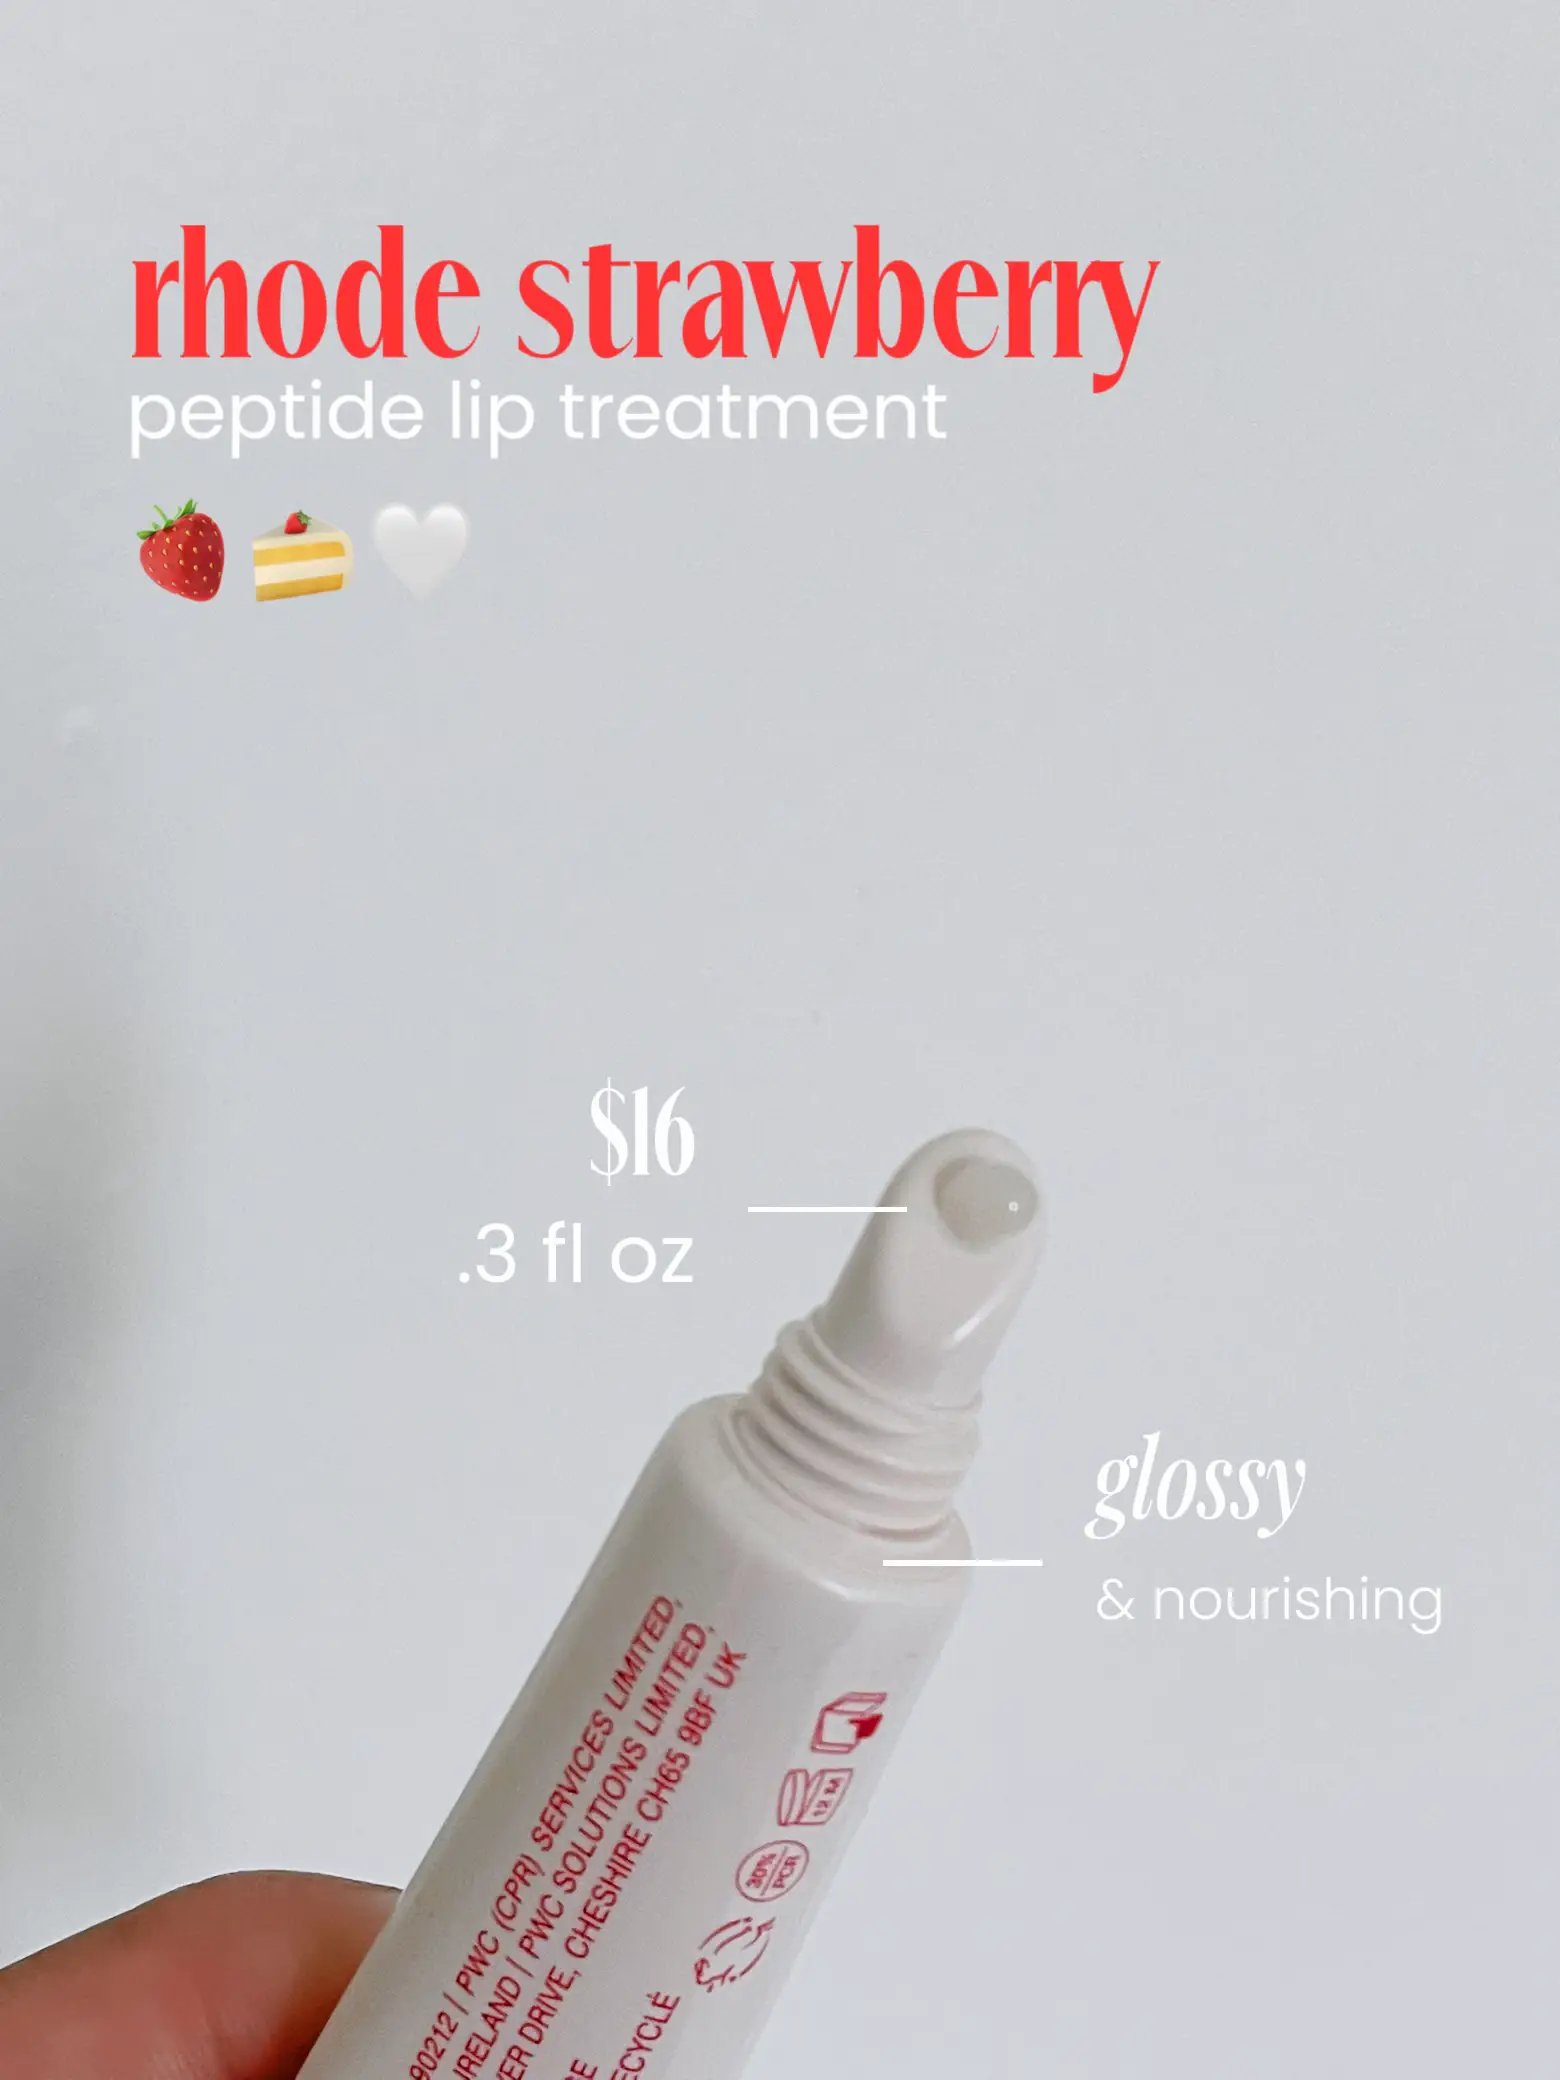 rhode strawberry peptide lip treatment review!